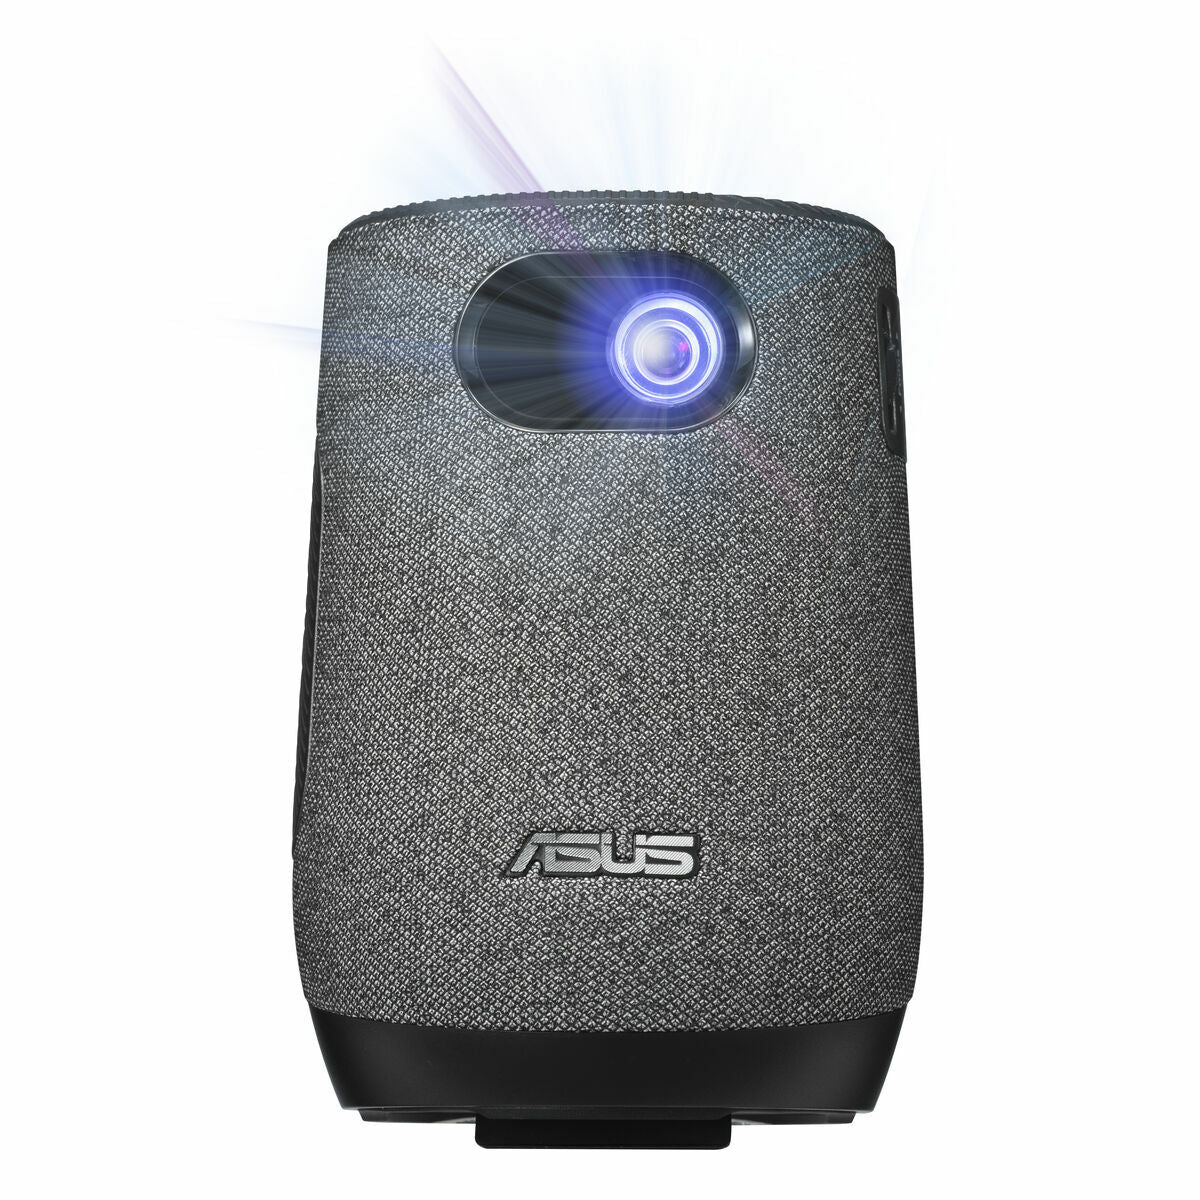 Projector Asus ZenBeam Latte L1 300 Lm Full HD 1920 x 1080 px, Asus, Electronics, TV, Video and home cinema, projector-asus-zenbeam-latte-l1-300-lm-full-hd-1920-x-1080-px, Brand_Asus, category-reference-2609, category-reference-2642, category-reference-2947, category-reference-t-18805, category-reference-t-18811, category-reference-t-19653, cinema and television, computers / peripherals, Condition_NEW, entertainment, office, Price_300 - 400, RiotNook